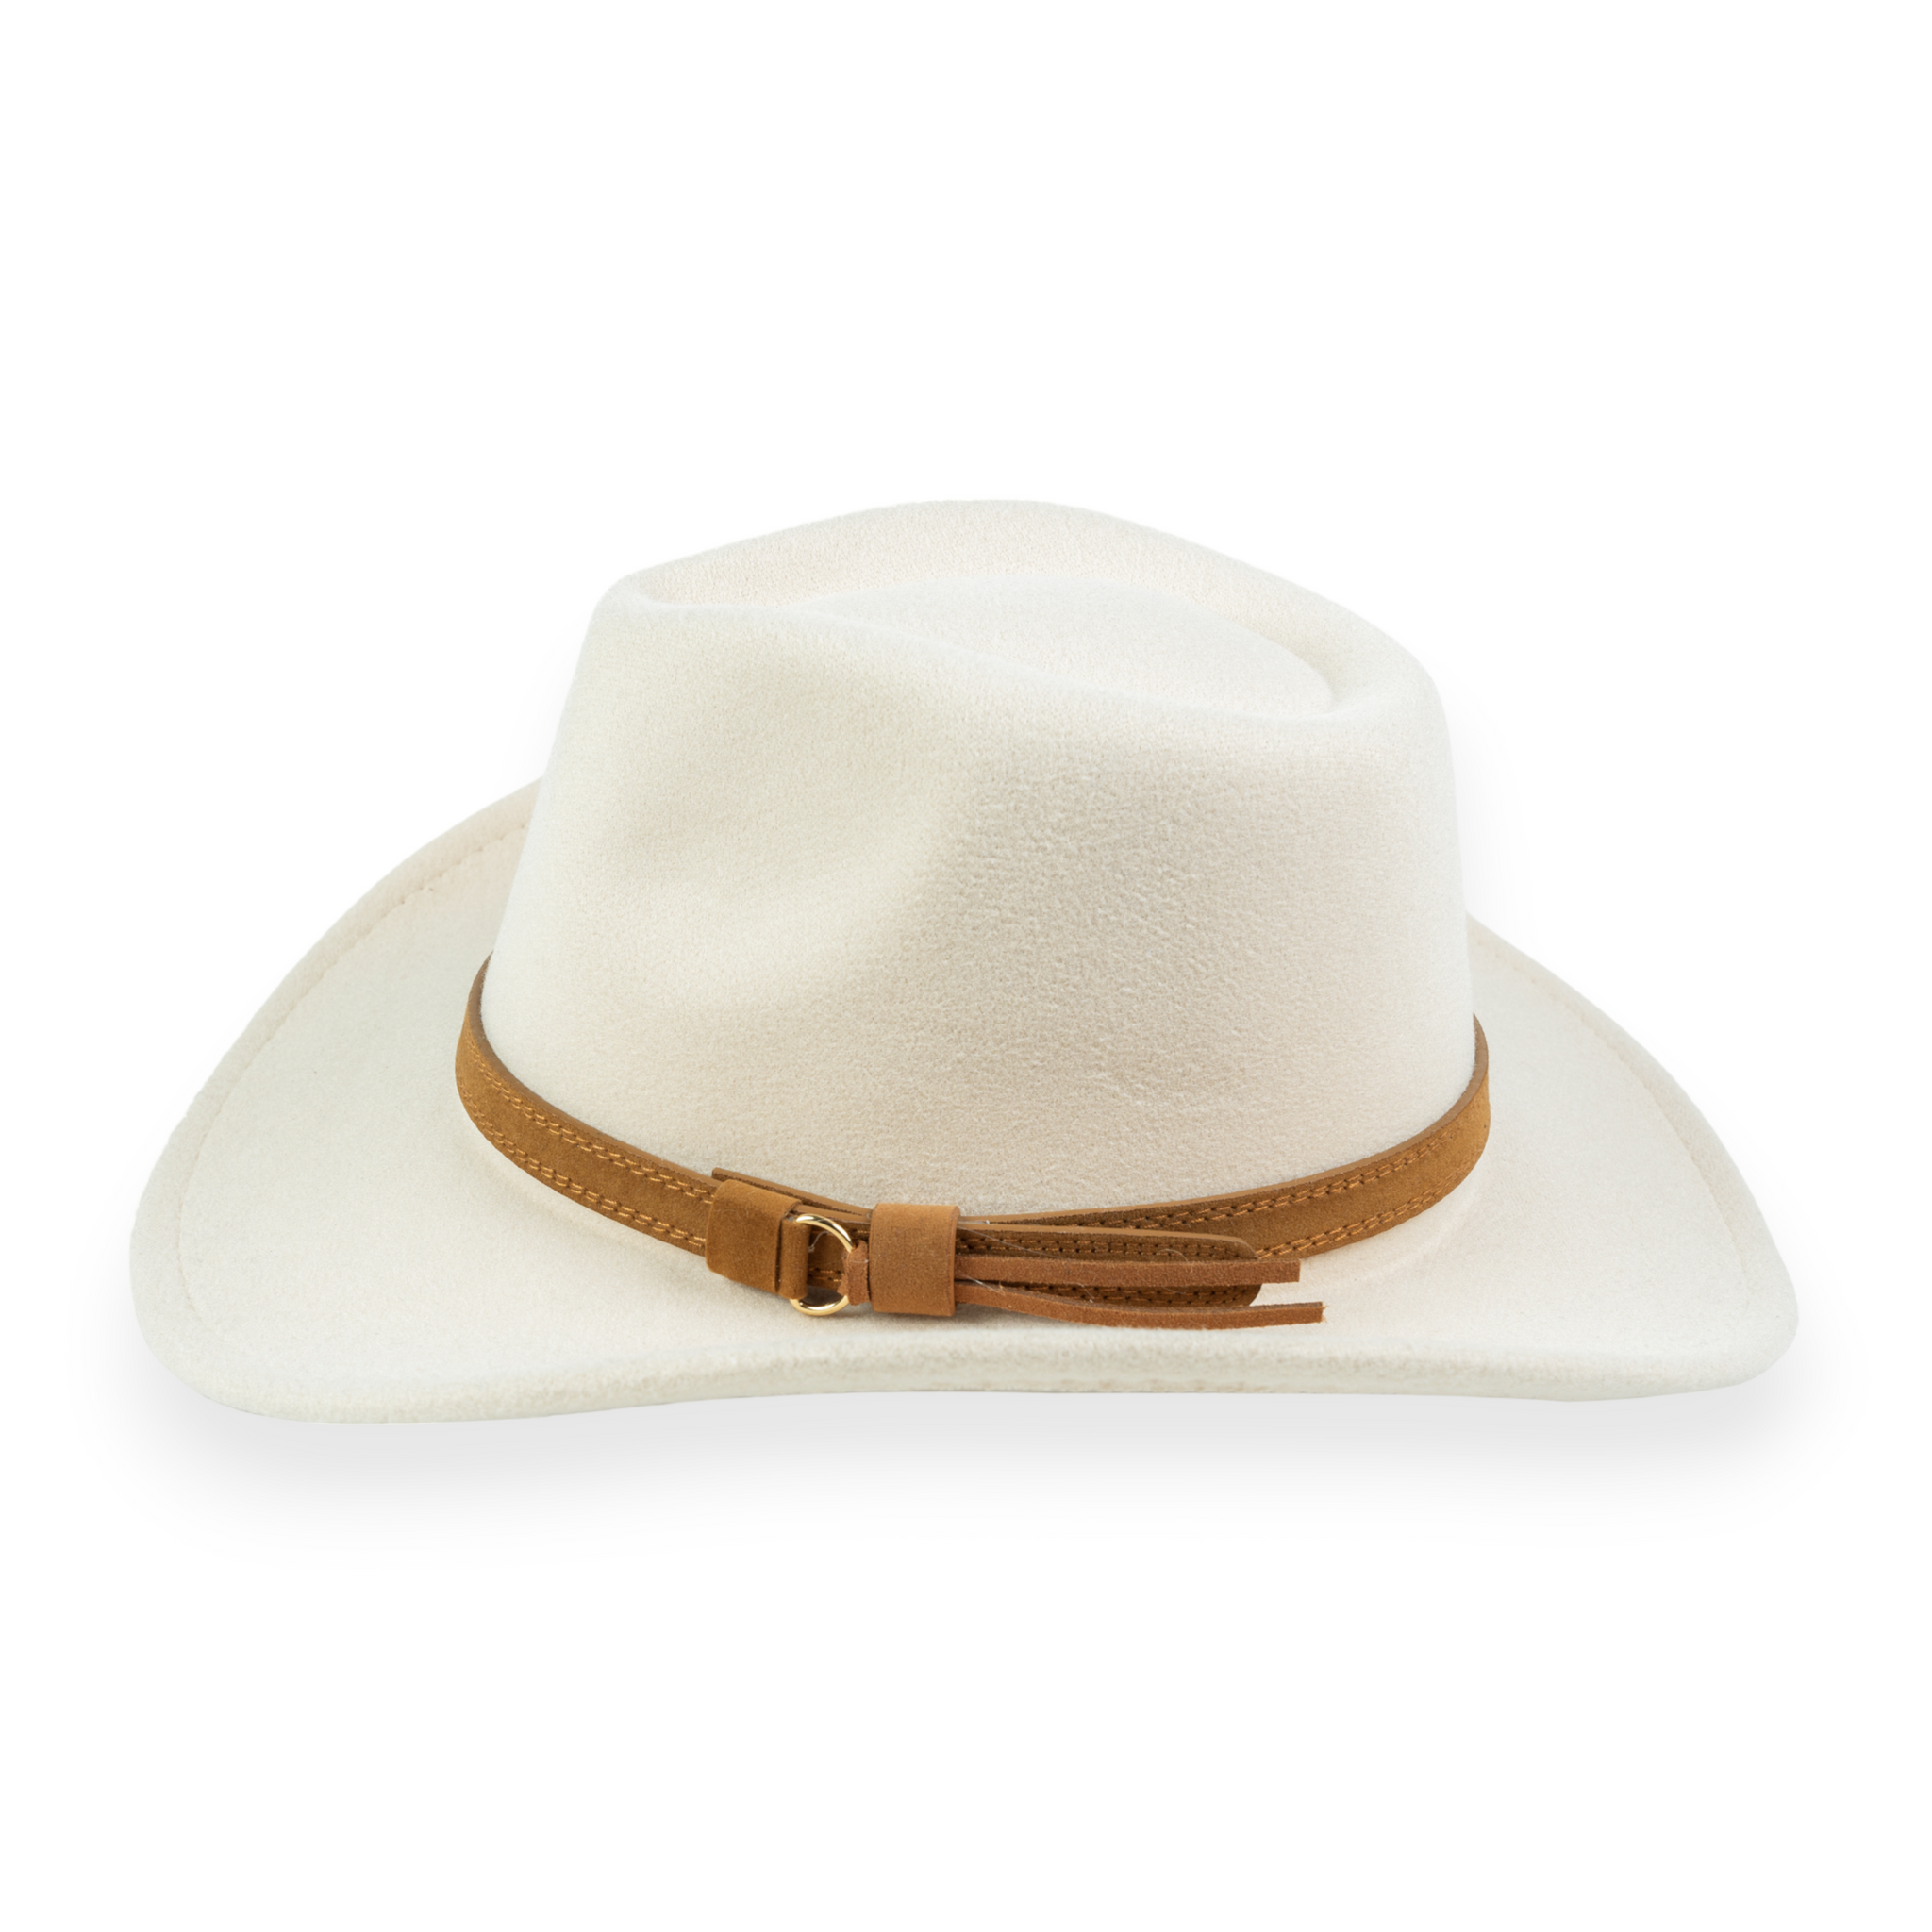 Chokore Pinched Cowboy Hat with PU Leather Belt (Off White)